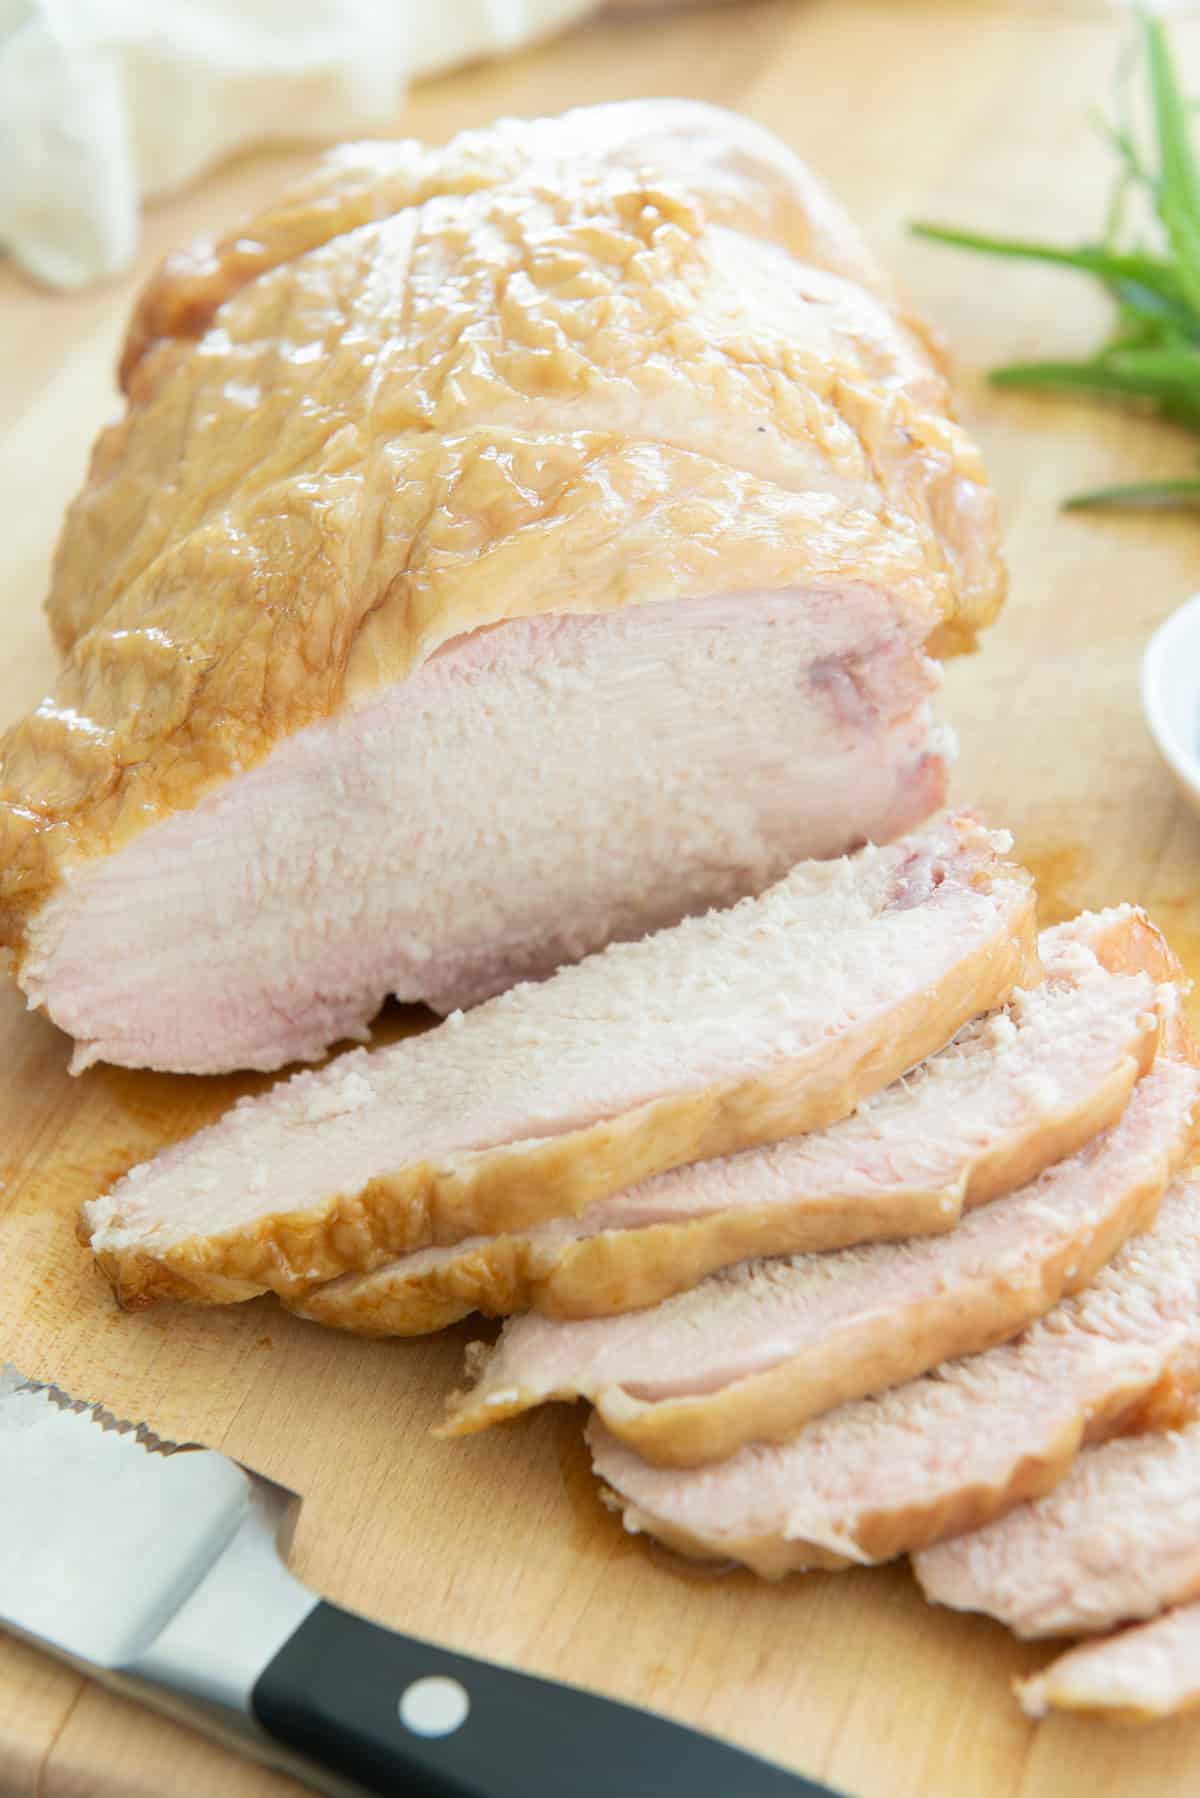 Slices of Smoked Turkey Breast on Wooden Board